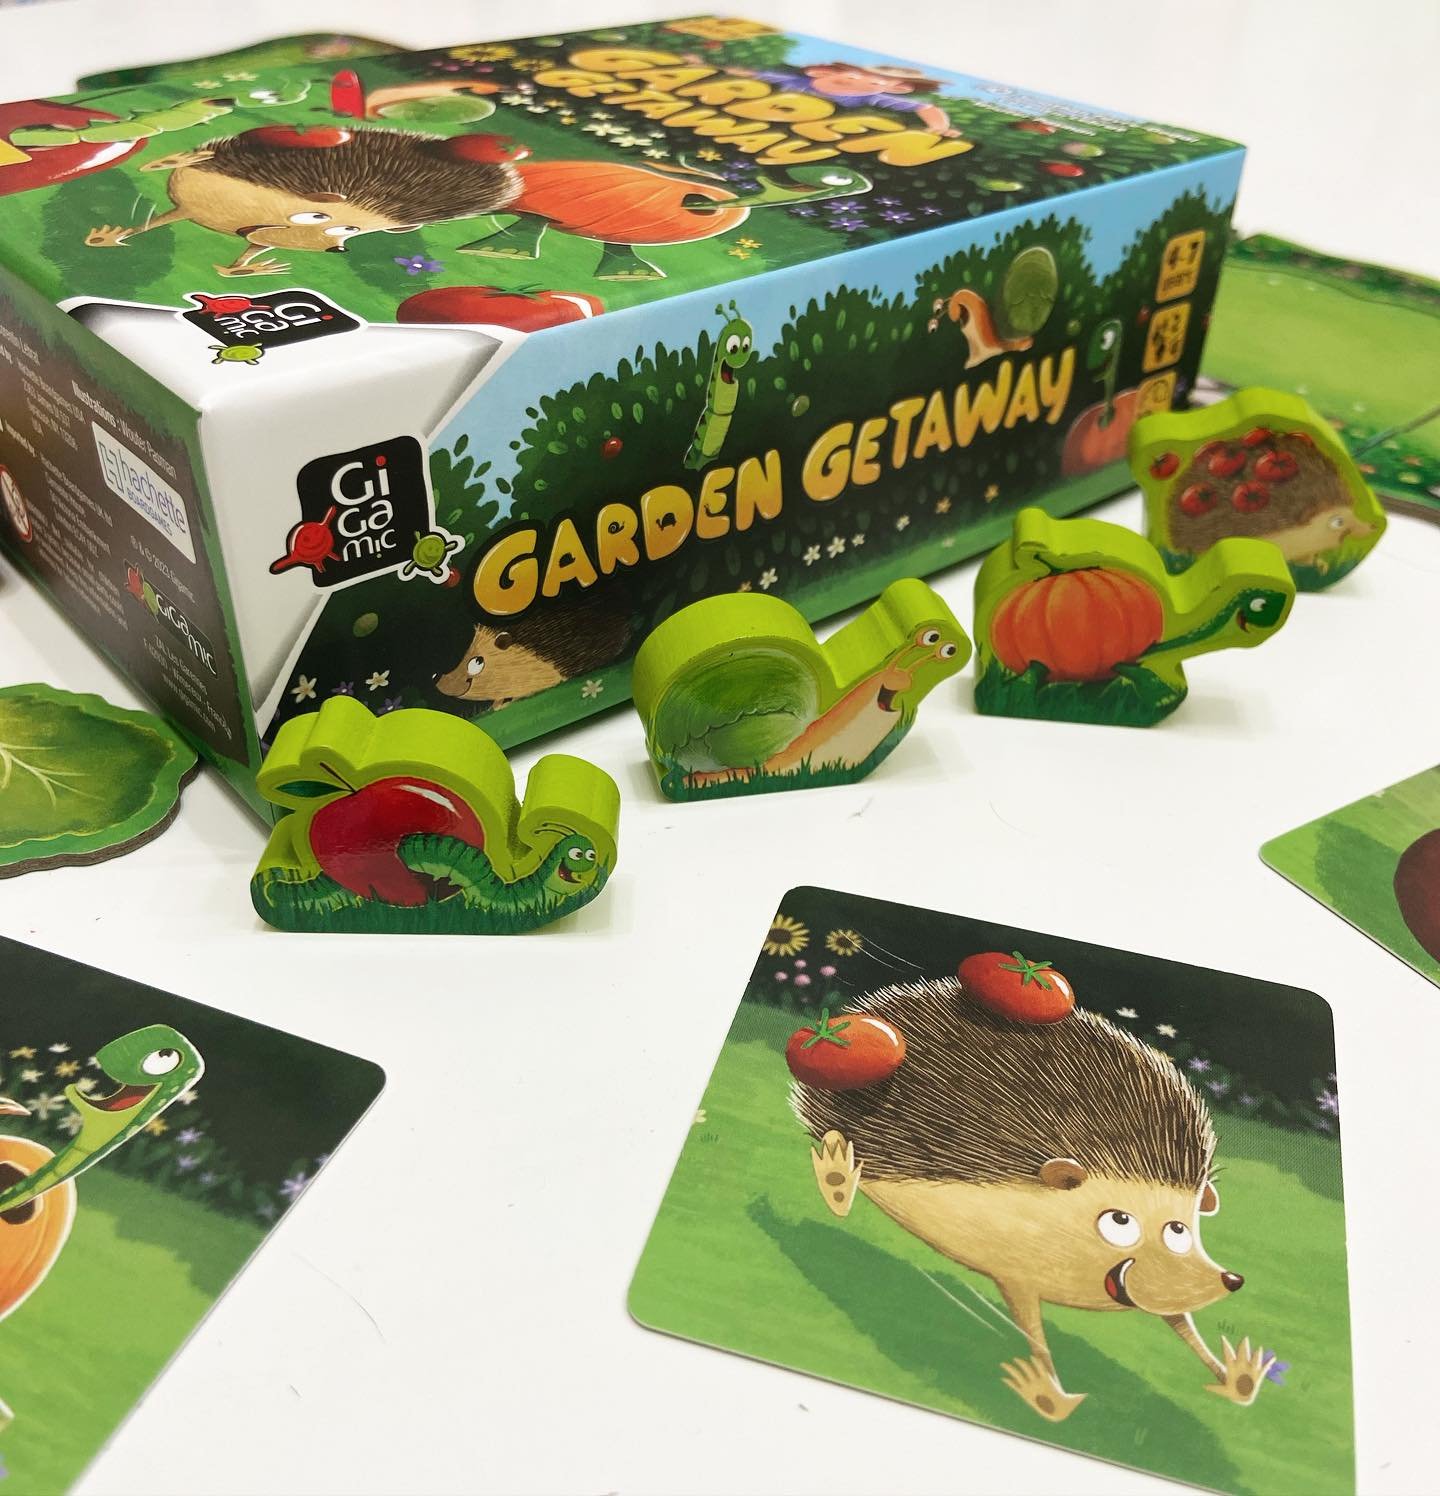 Dad and daughter thoughts on Garden Getaway from @gigamicworld and @hachetteboardgamesusa 🦔🐢🪱🐌 - my daughter and I have been testing this one out together. It&rsquo;s a racing game that says ages 4-7, but she still enjoys it at 8.

I&rsquo;m glad